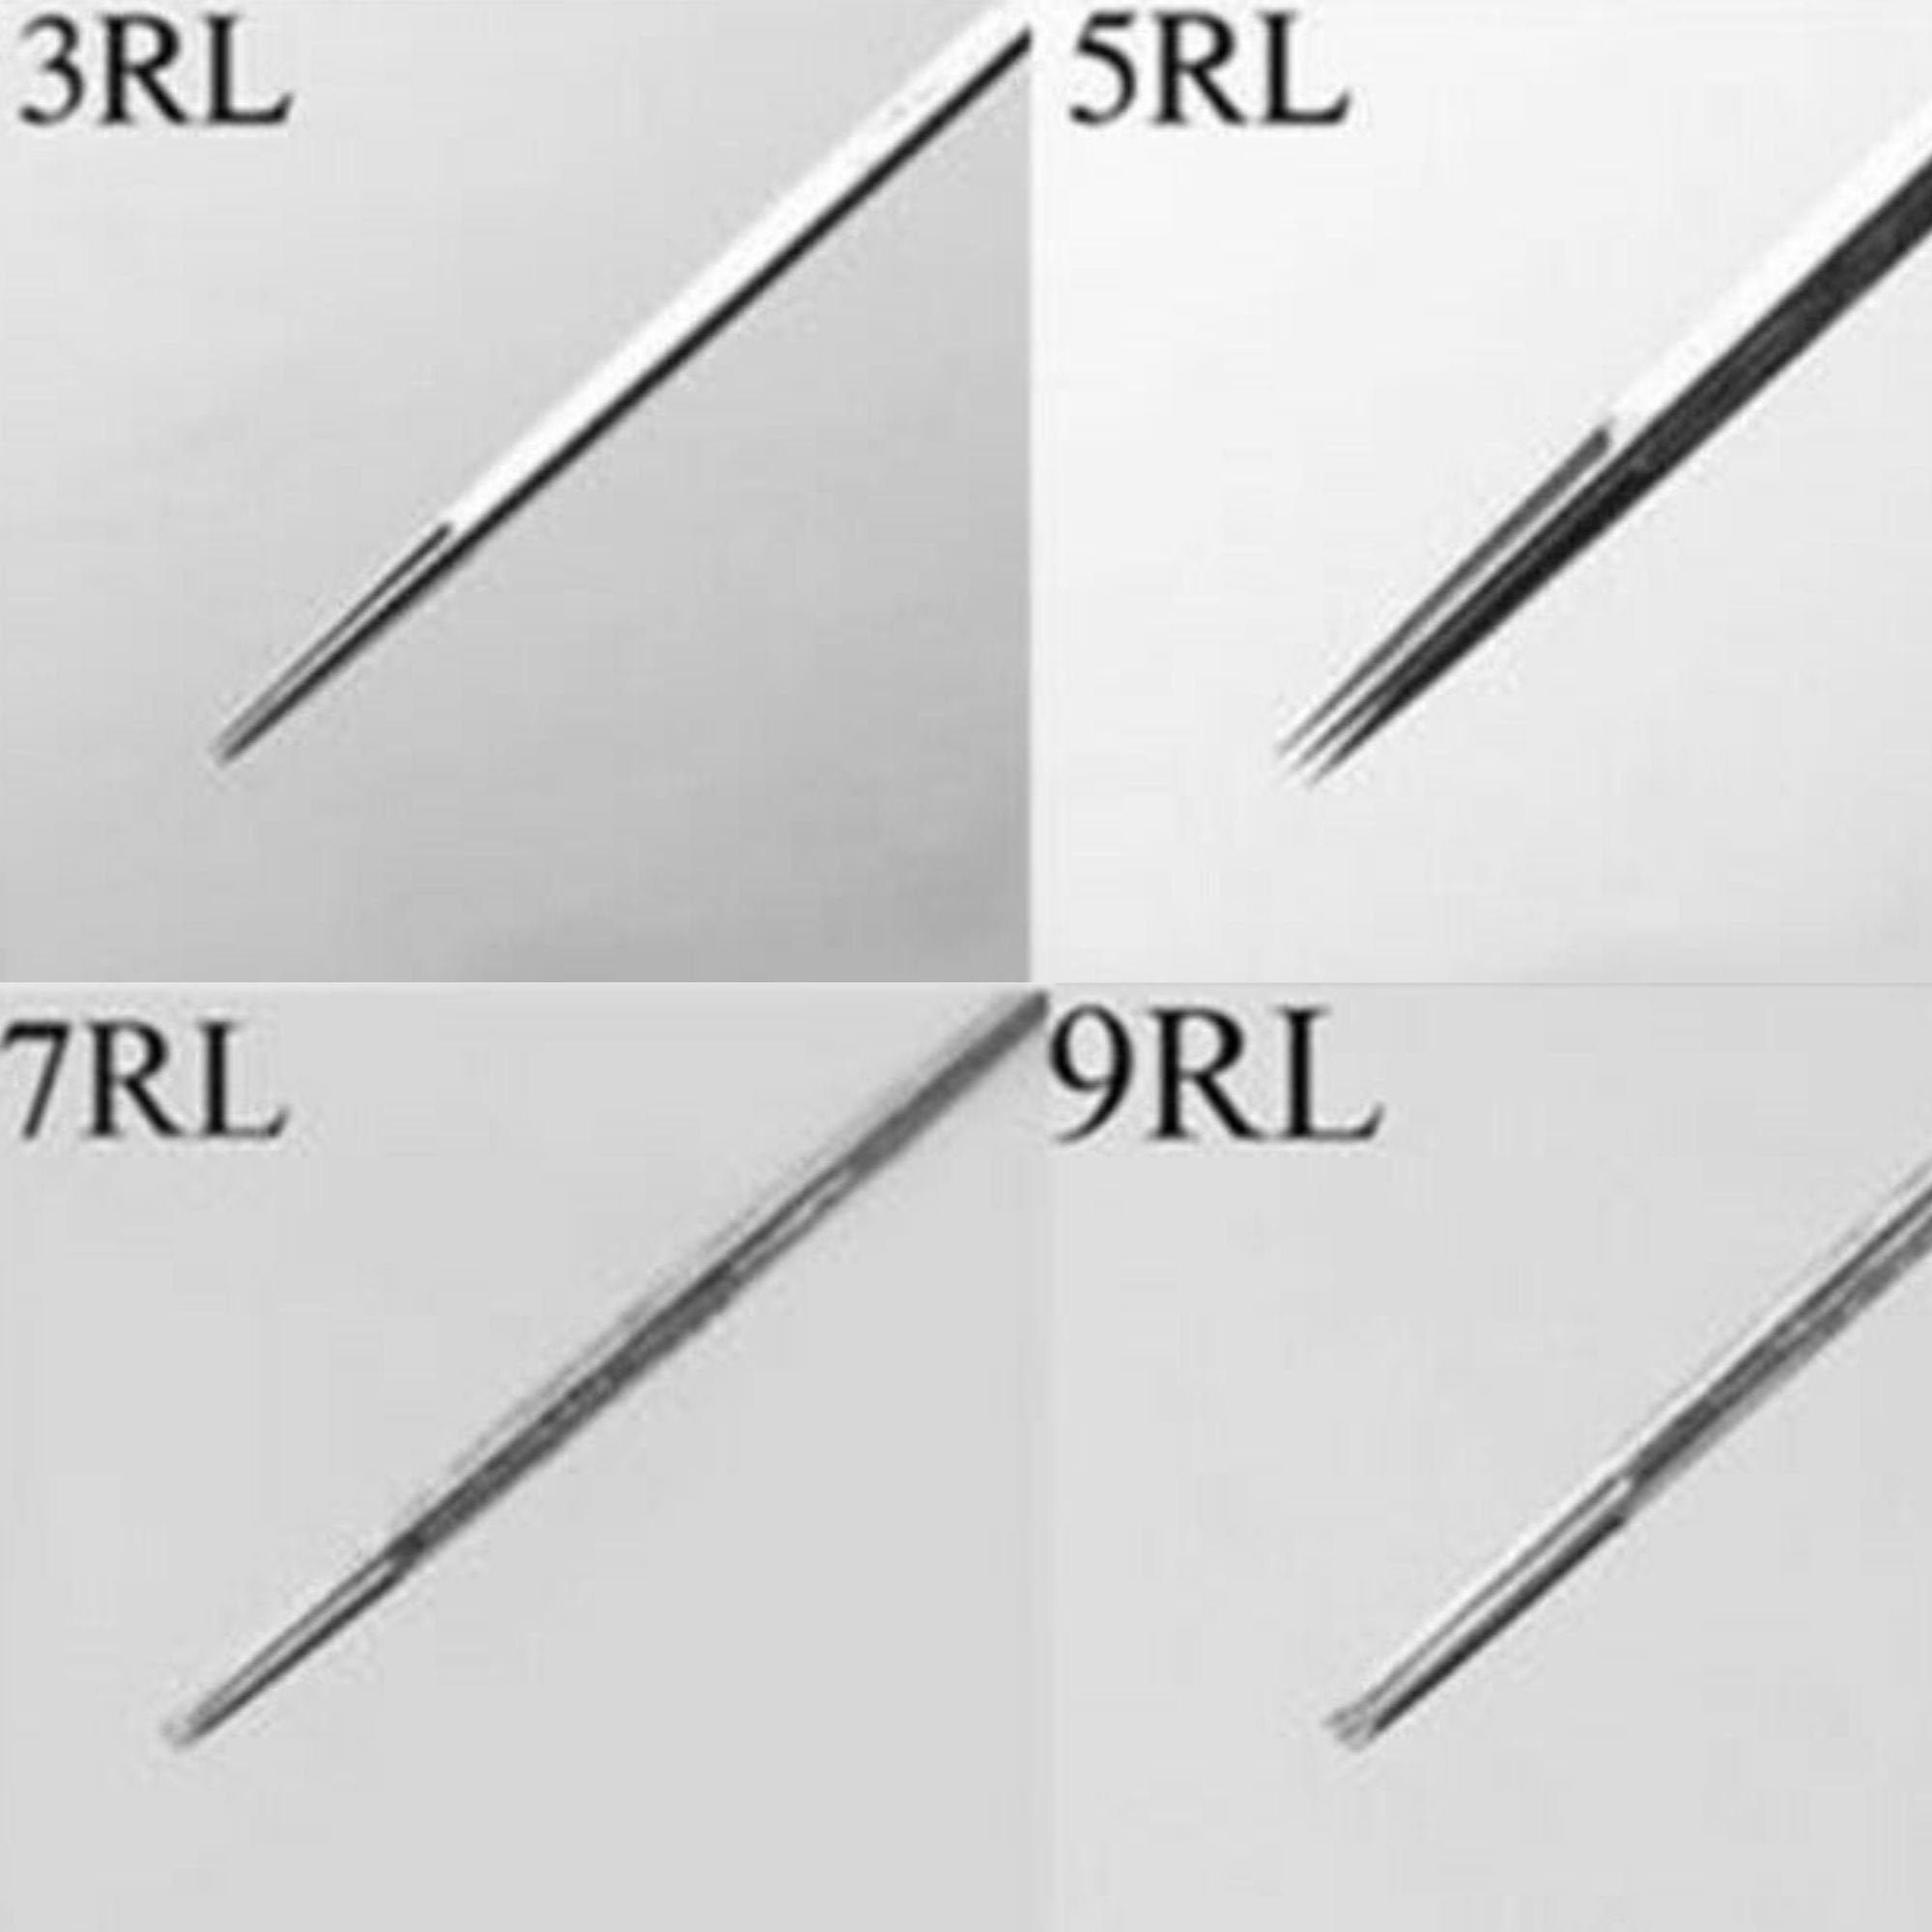 Shield plus 1203RL Disposable Round Liner Tattoo Needles Pack of 50  Disposable Round Liner Tattoo Needles Price in India  Buy Shield plus  1203RL Disposable Round Liner Tattoo Needles Pack of 50